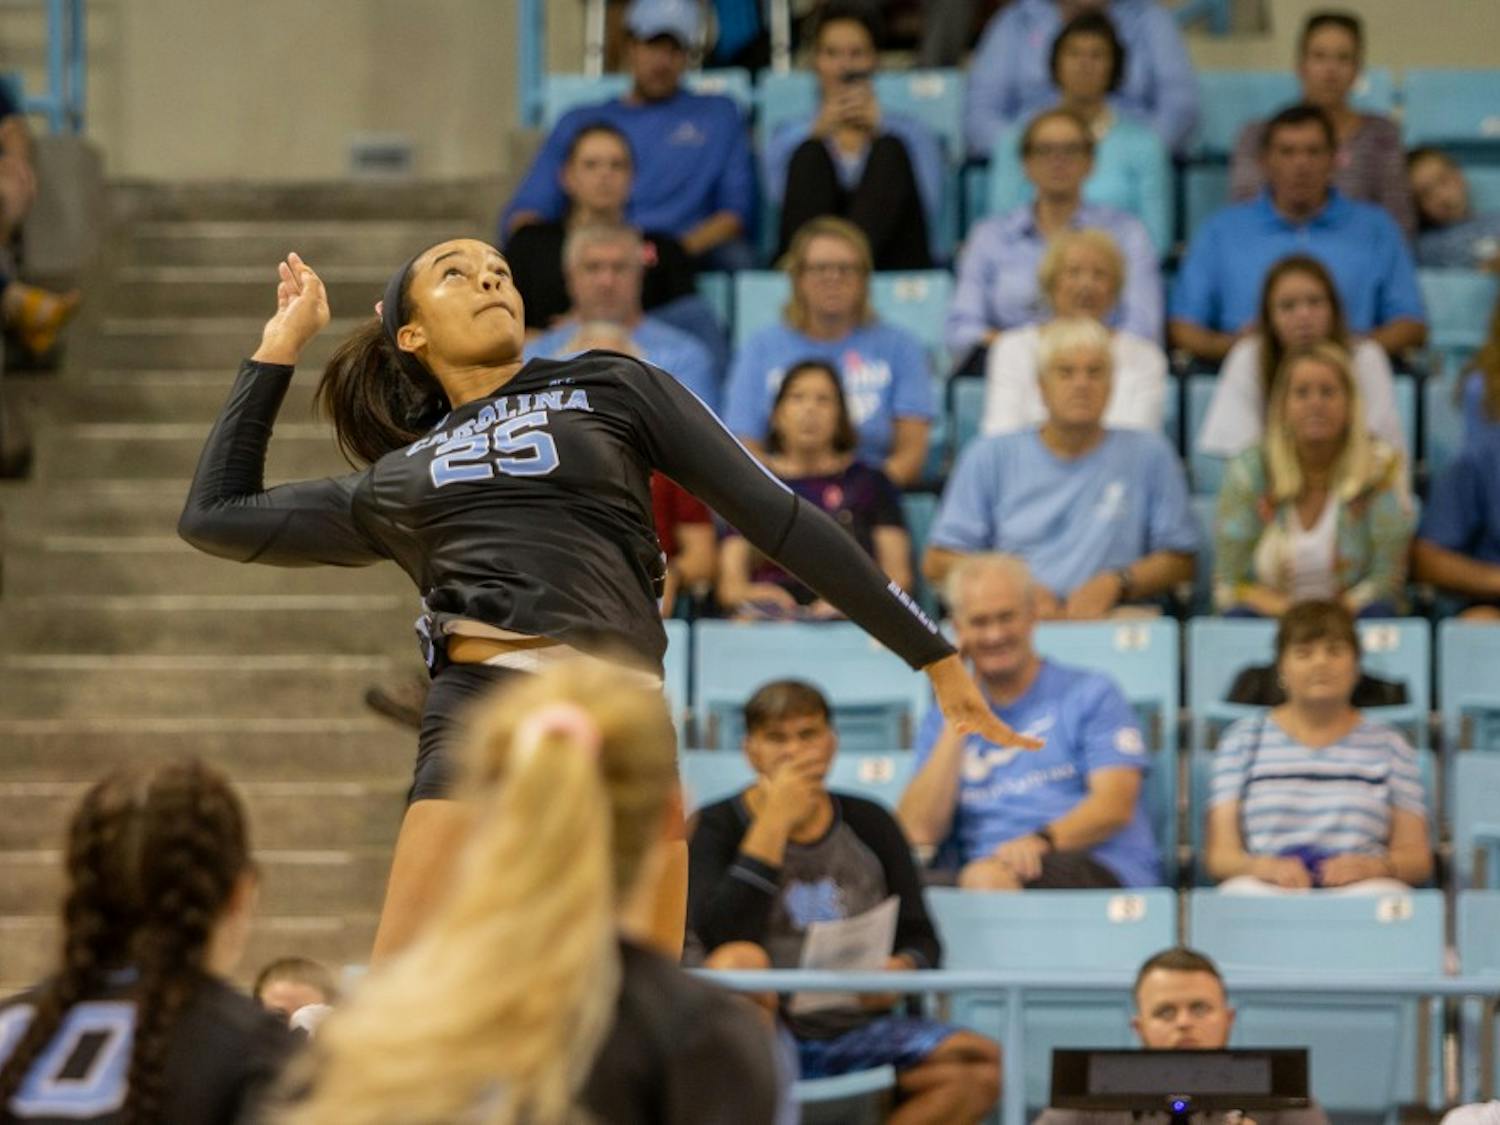 UNC freshman outside hitter Lauren Harrison (25) spikes the ball during the Tar Heels' 3-0 win against the Boston College Eagles on Sunday, Oct. 27, 2019 in Carmichael Arena in Chapel Hill. UNC beat Boston College 3-0.